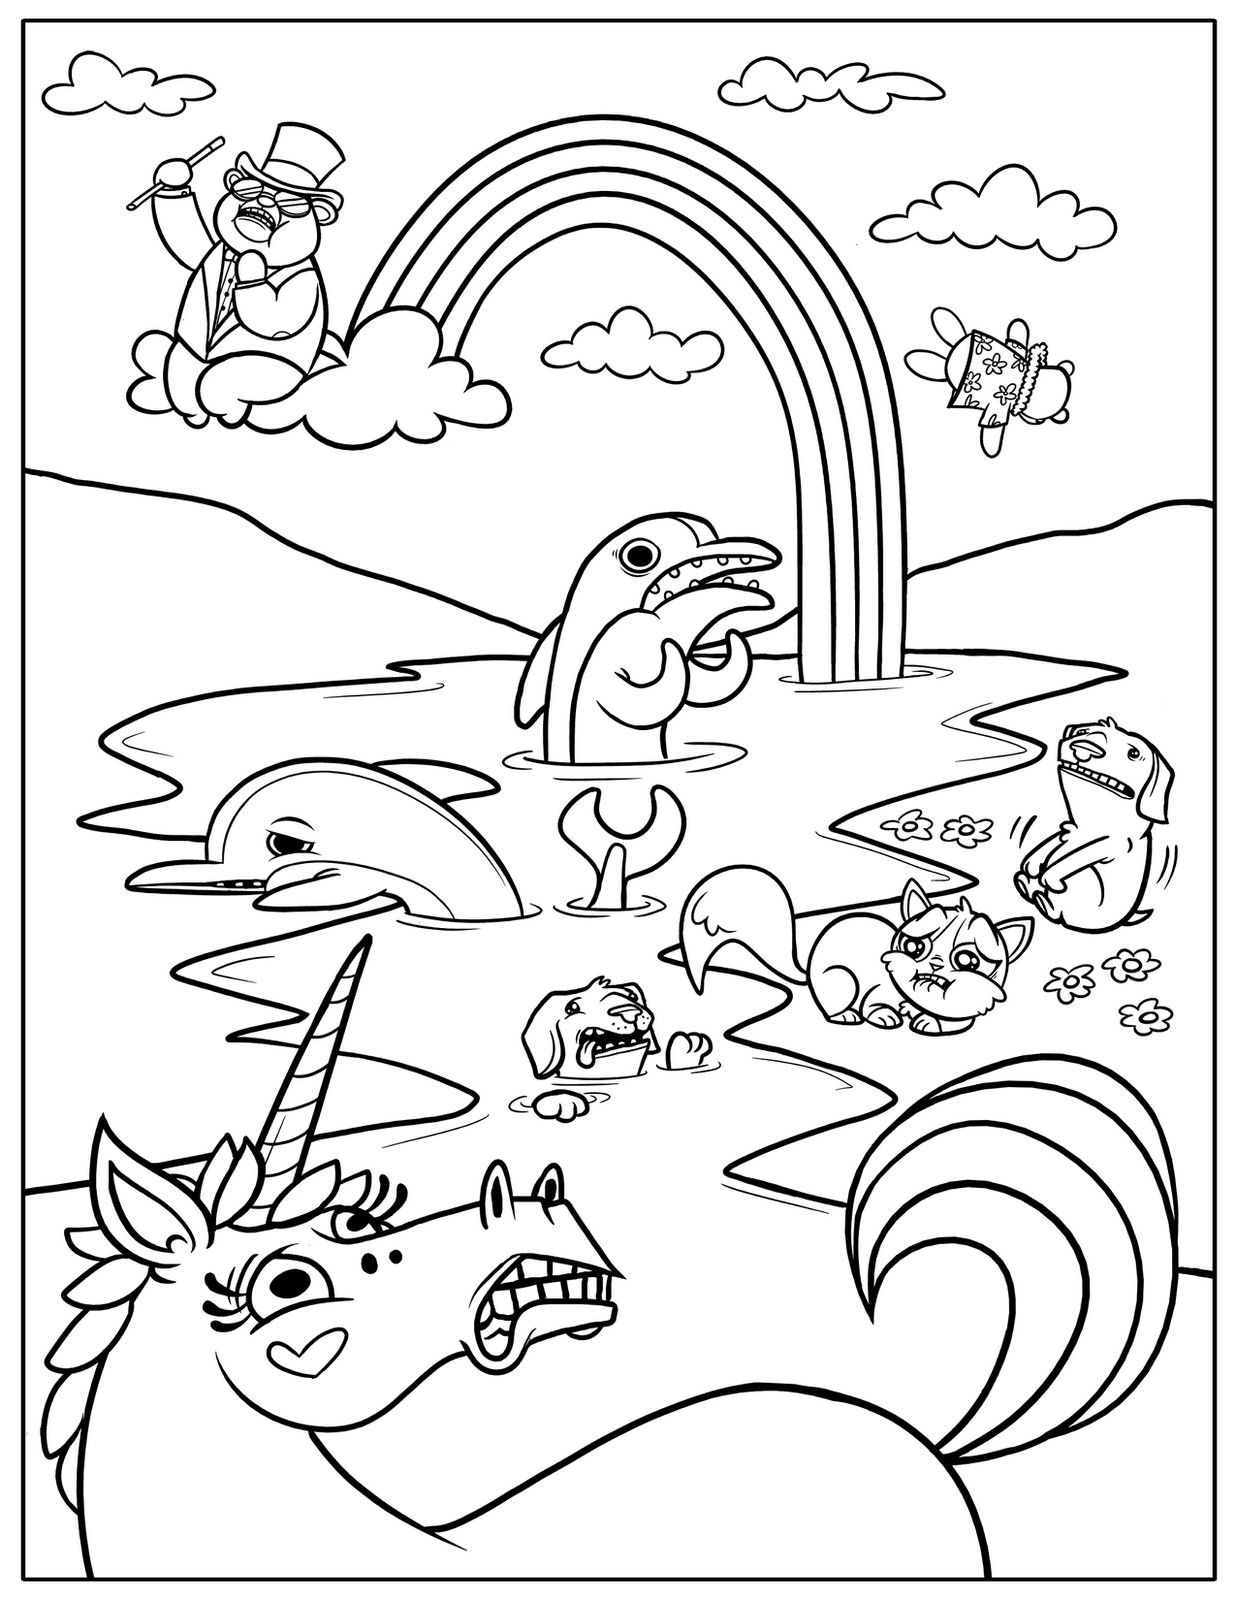 Printable Coloring Pages For Teenagers
 Free Printable Rainbow Coloring Pages For Kids